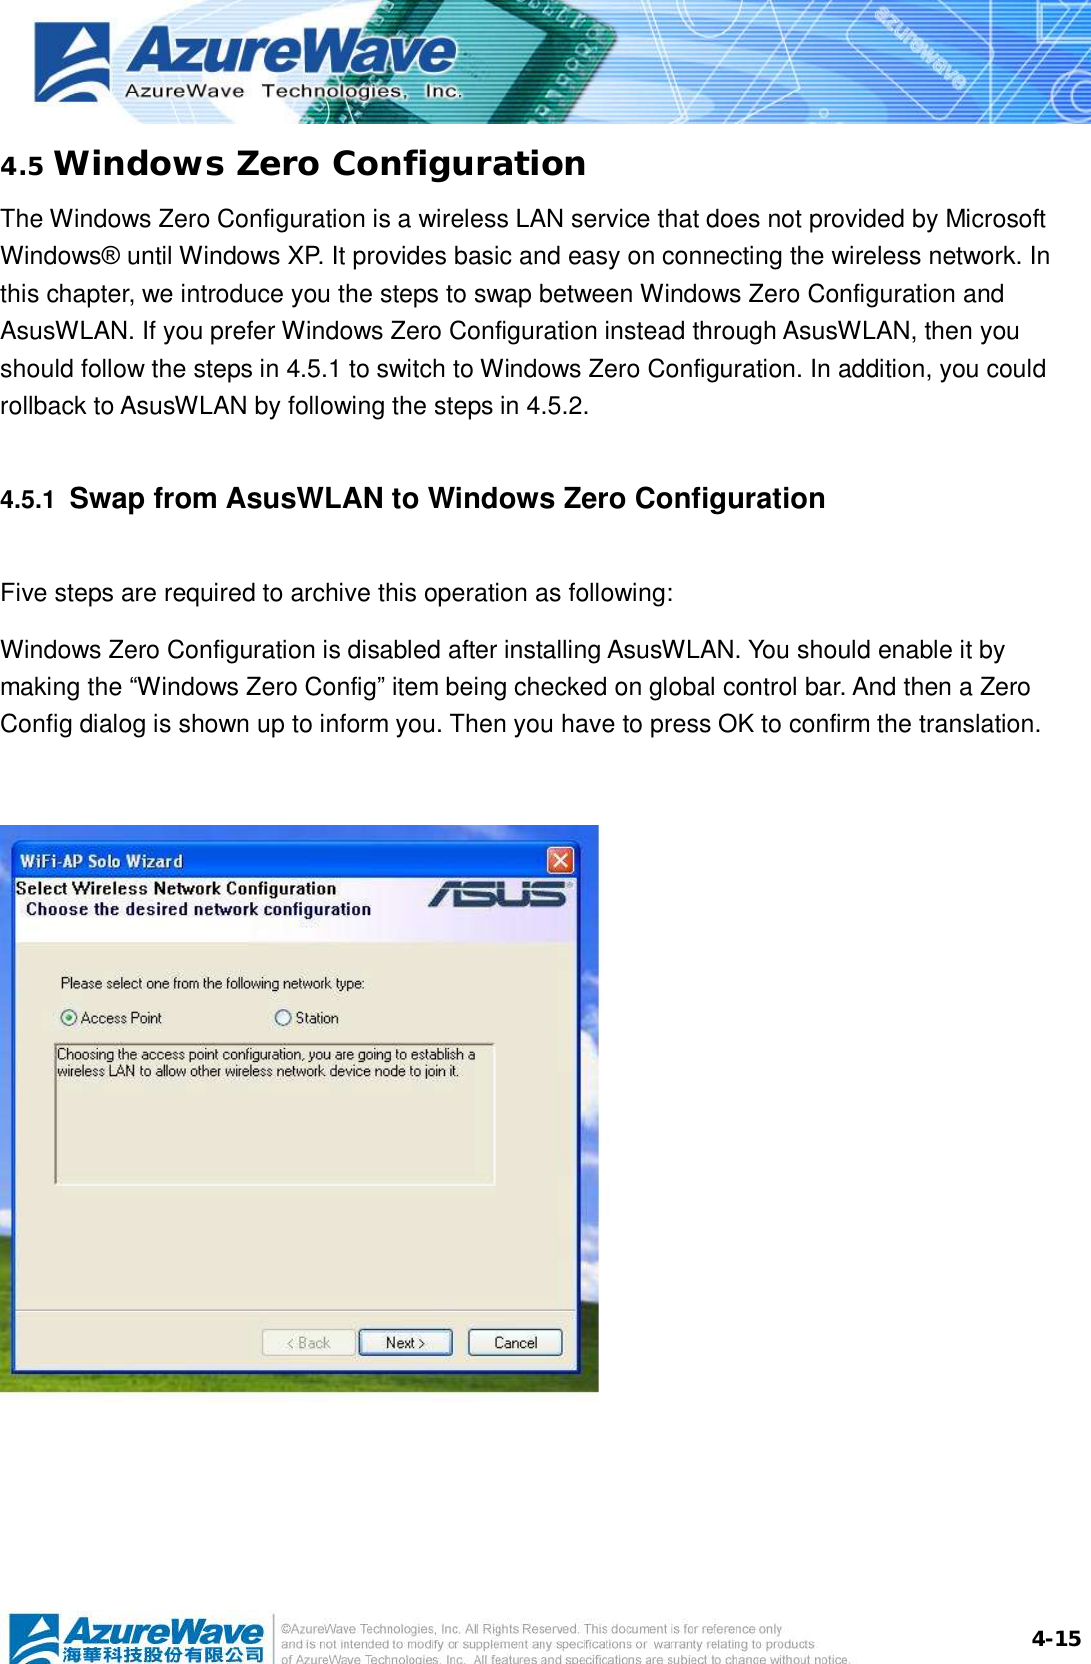  4-154.5 Windows Zero Configuration The Windows Zero Configuration is a wireless LAN service that does not provided by Microsoft Windows® until Windows XP. It provides basic and easy on connecting the wireless network. In this chapter, we introduce you the steps to swap between Windows Zero Configuration and AsusWLAN. If you prefer Windows Zero Configuration instead through AsusWLAN, then you should follow the steps in 4.5.1 to switch to Windows Zero Configuration. In addition, you could rollback to AsusWLAN by following the steps in 4.5.2. 4.5.1  Swap from AsusWLAN to Windows Zero Configuration Five steps are required to archive this operation as following: Windows Zero Configuration is disabled after installing AsusWLAN. You should enable it by making the “Windows Zero Config” item being checked on global control bar. And then a Zero Config dialog is shown up to inform you. Then you have to press OK to confirm the translation.     